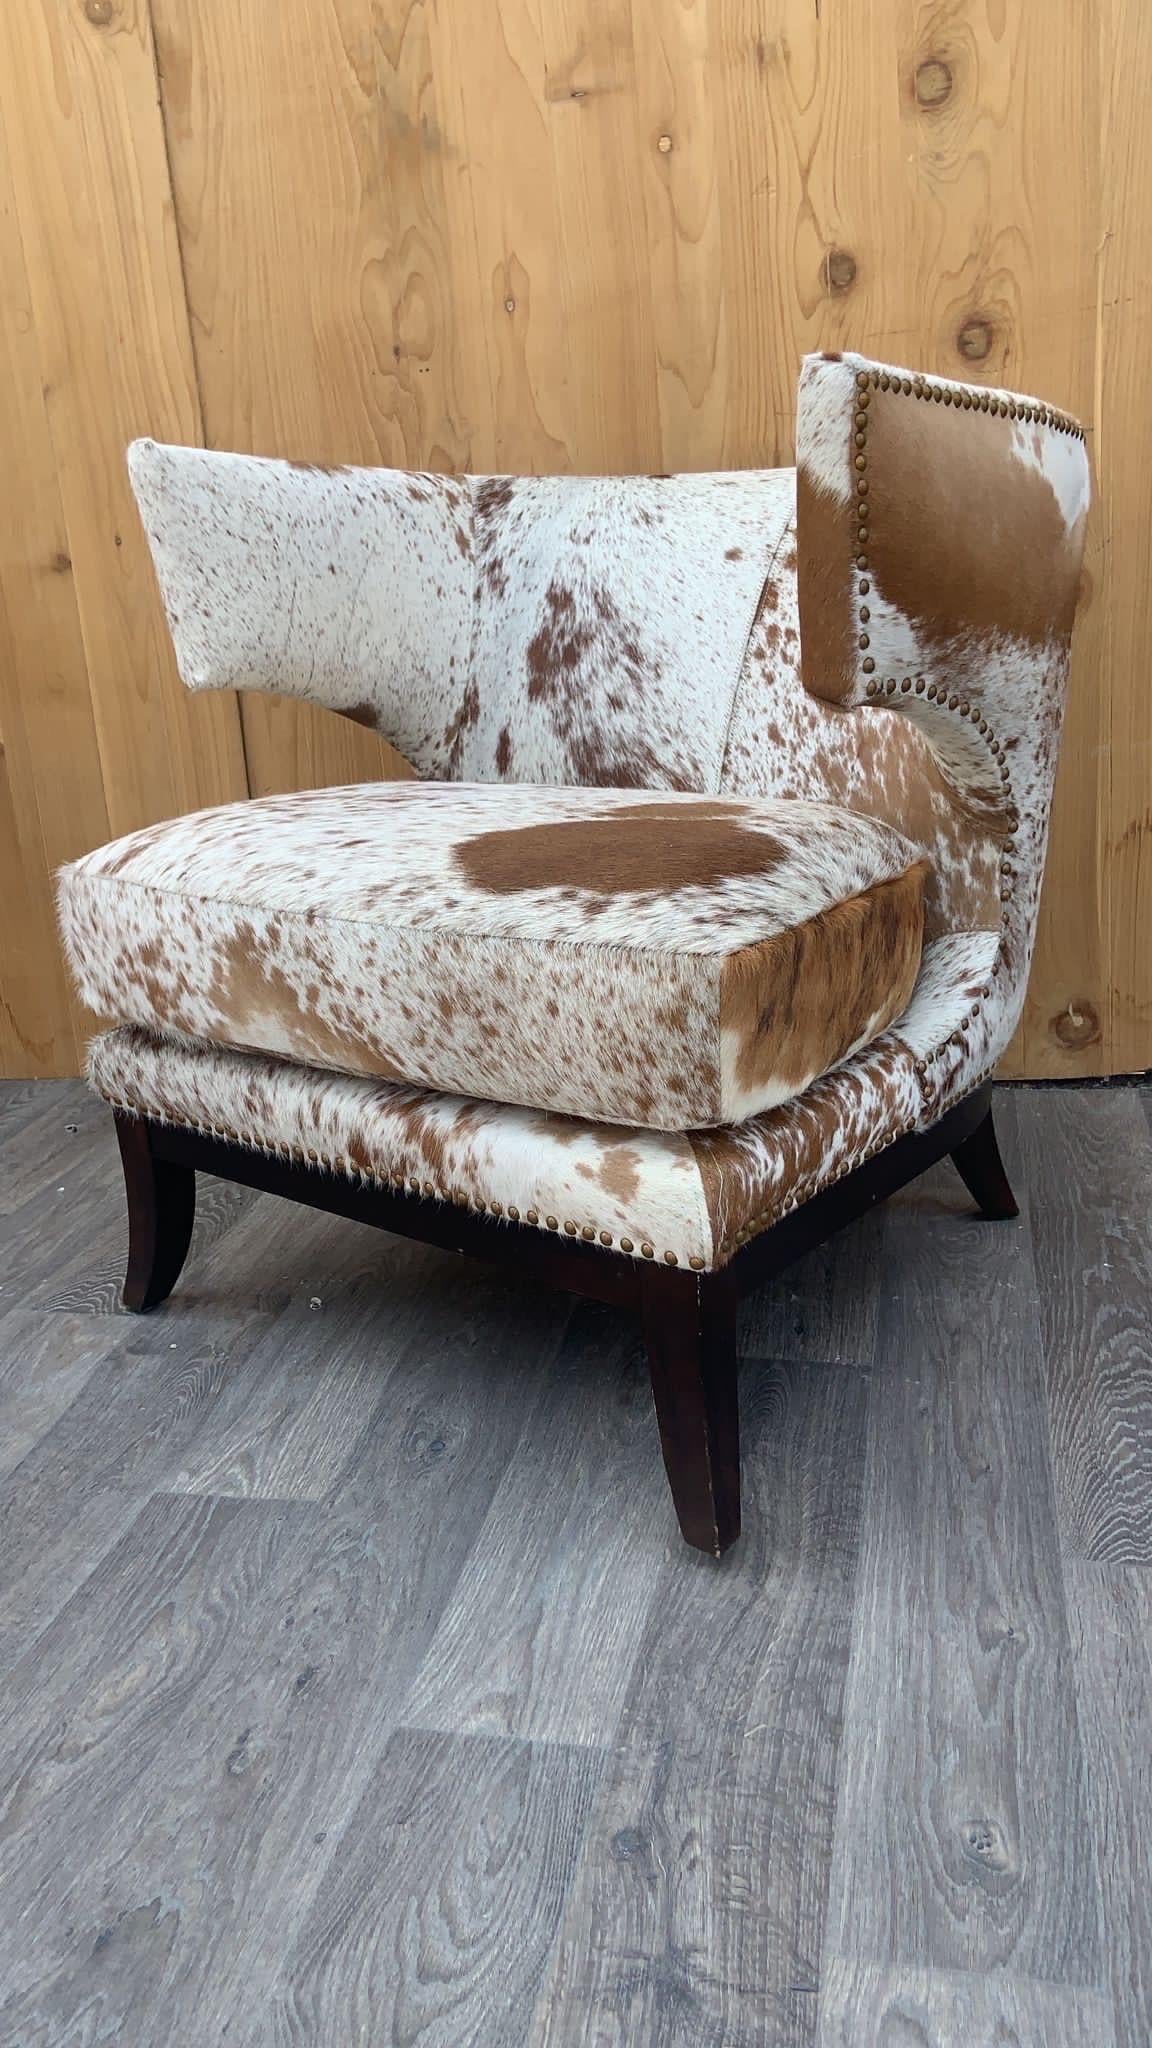 English Horseshoe Savoy Chairs Newly Upholstered in Brazilian Cowhide - Set of 2 3